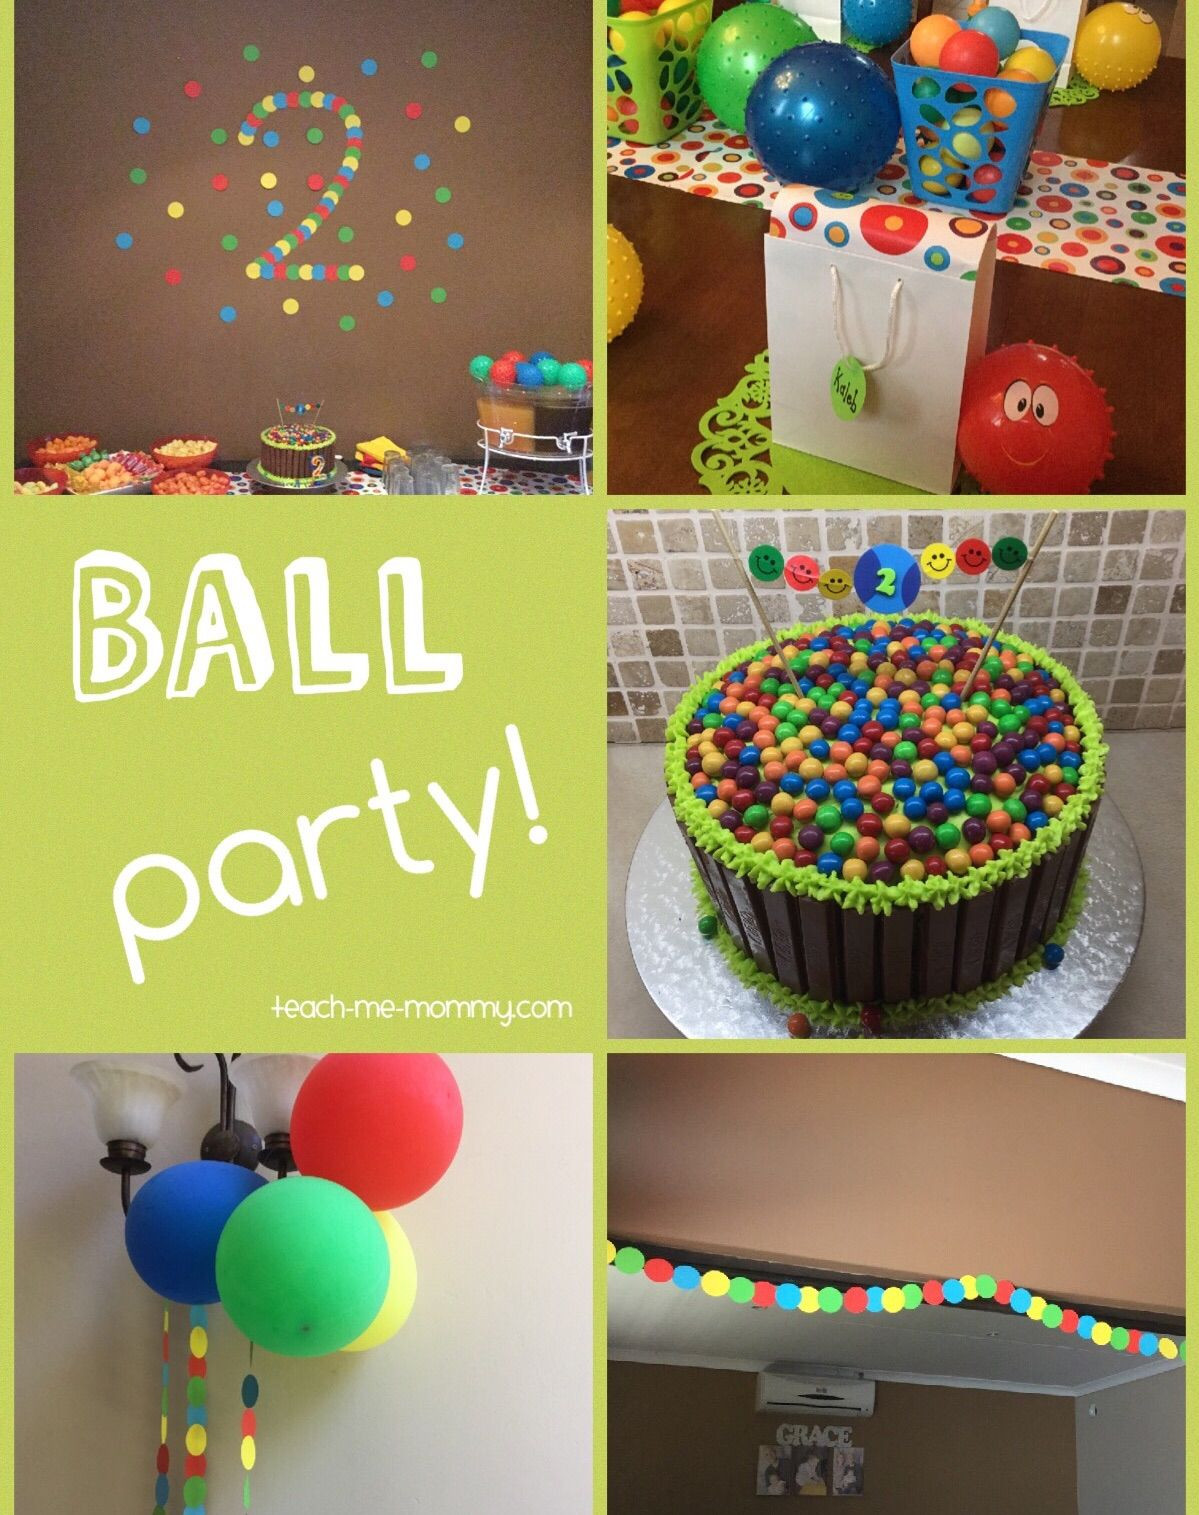 2 Year Old Birthday Gift Ideas
 Ball Themed Party for a 2 Year Old